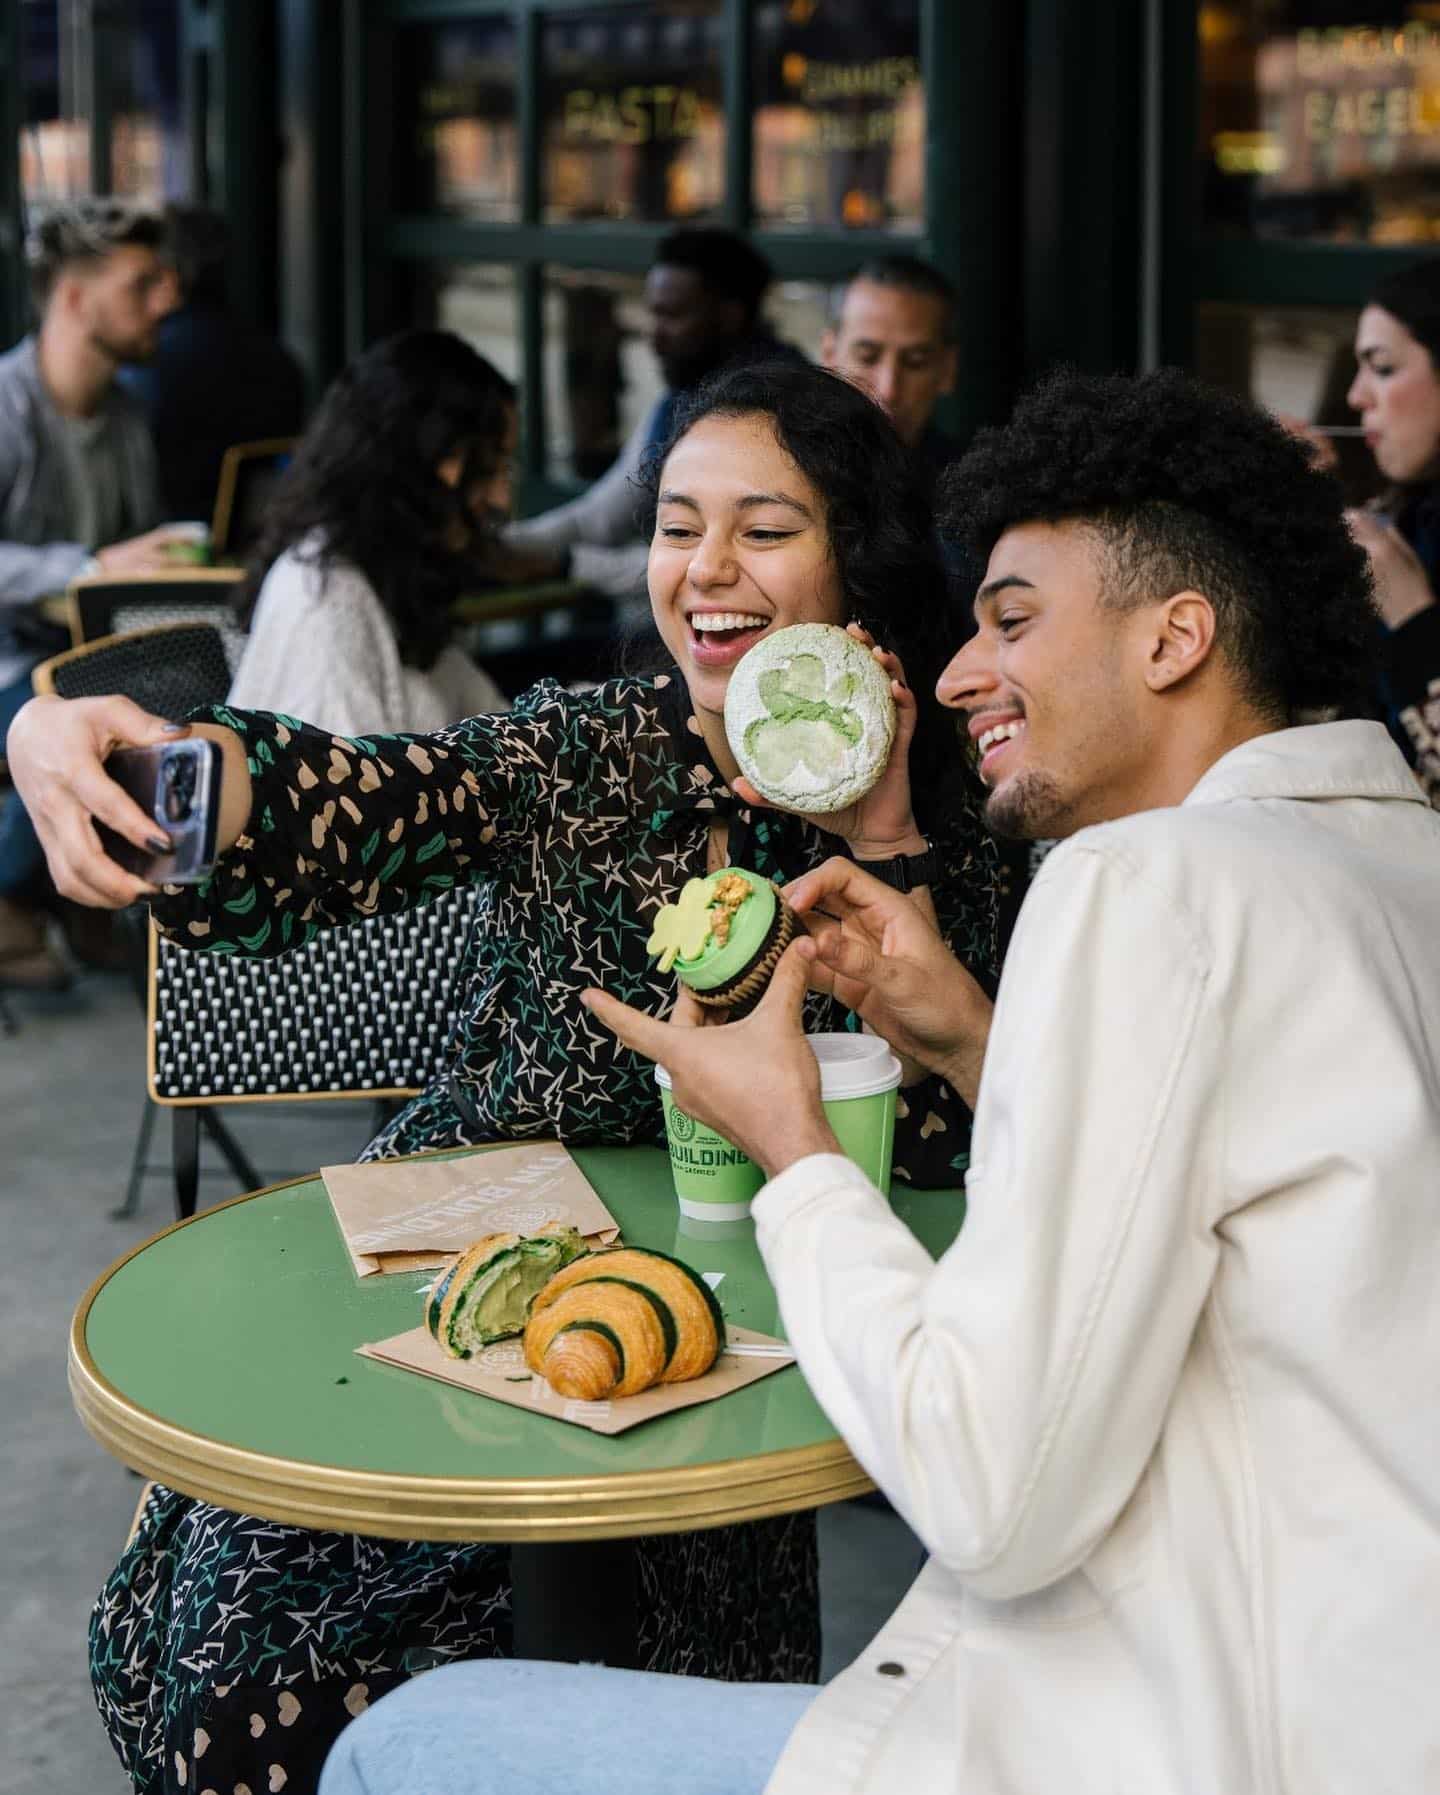 4 Leaf Clover Cupcakes. Green Mint Crinkle Cookies. Pistachio Croissants. Get lucky today with these delicious St. Patrick’s Day-inspired pastries at the @tinbuilding

Explore neighborhood specials ➤ link in bio.